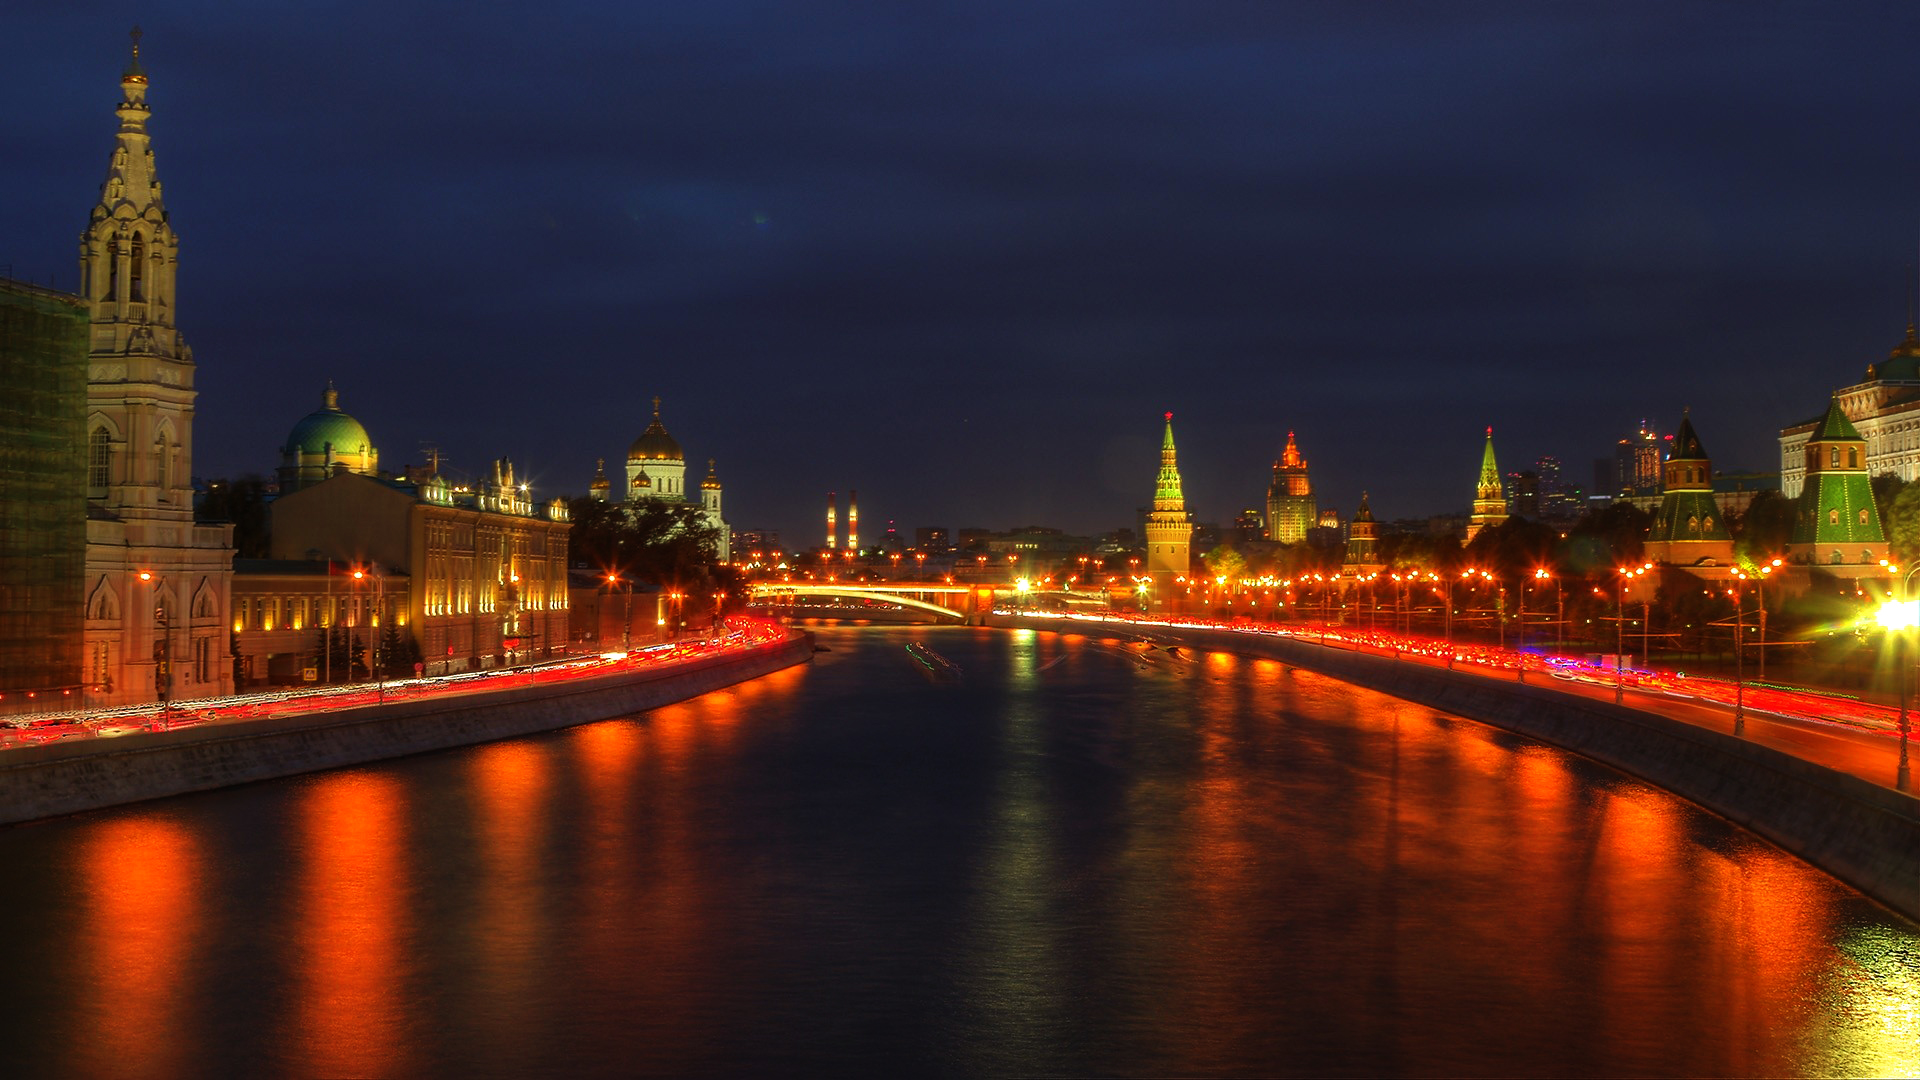 Russia The Kremlin Moscow Wallpaper 75892 Wallpapers13 Com Images, Photos, Reviews